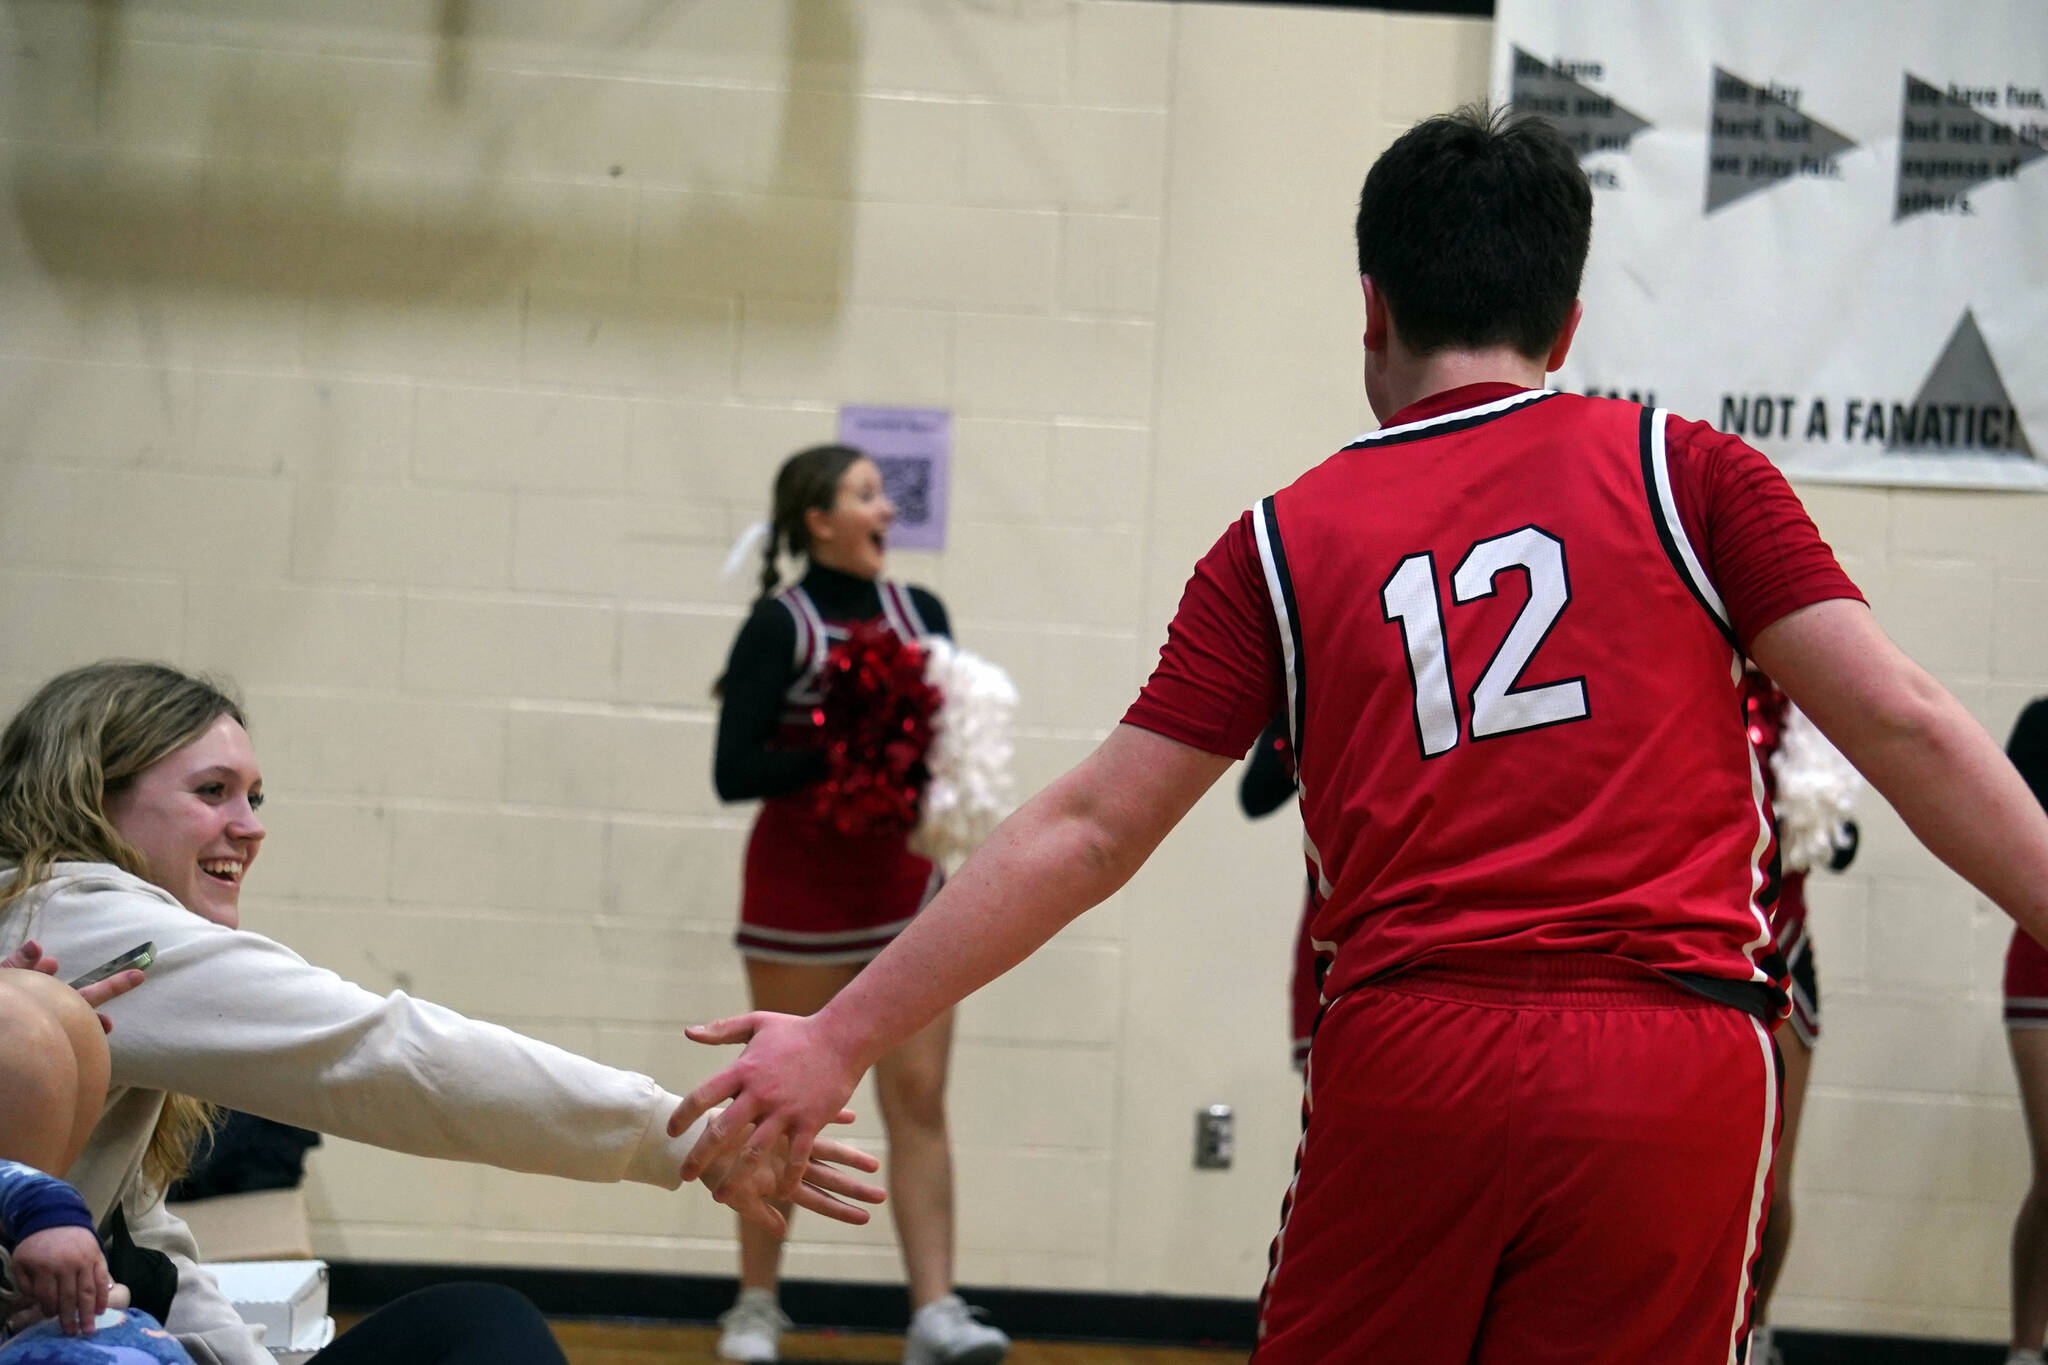 Kenai’s Connor Ley collects high fives from the bleachers after making an unlikely shot during a basketball game at Nikiski Middle/High School in Nikiski, Alaska, on Tuesday, Feb. 20, 2024. (Jake Dye/Peninsula Clarion)